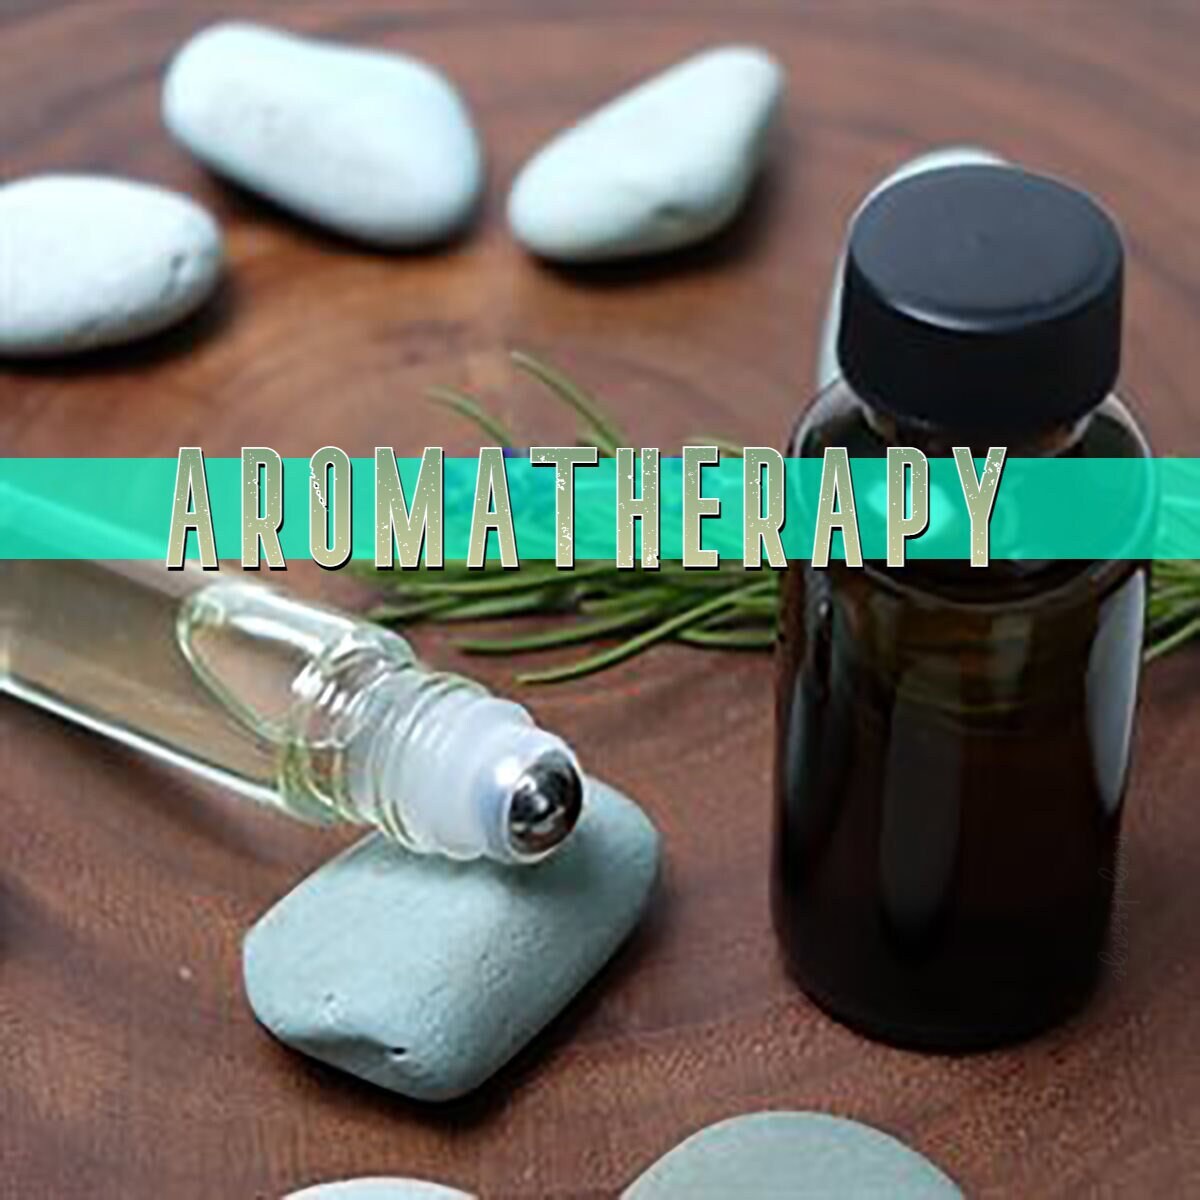 AROMATHERAPY Oil - choose your scent - Customizable - Essential oils in carrier oil for therapeutic benefit - Diffuser, Massage, Bath, Body